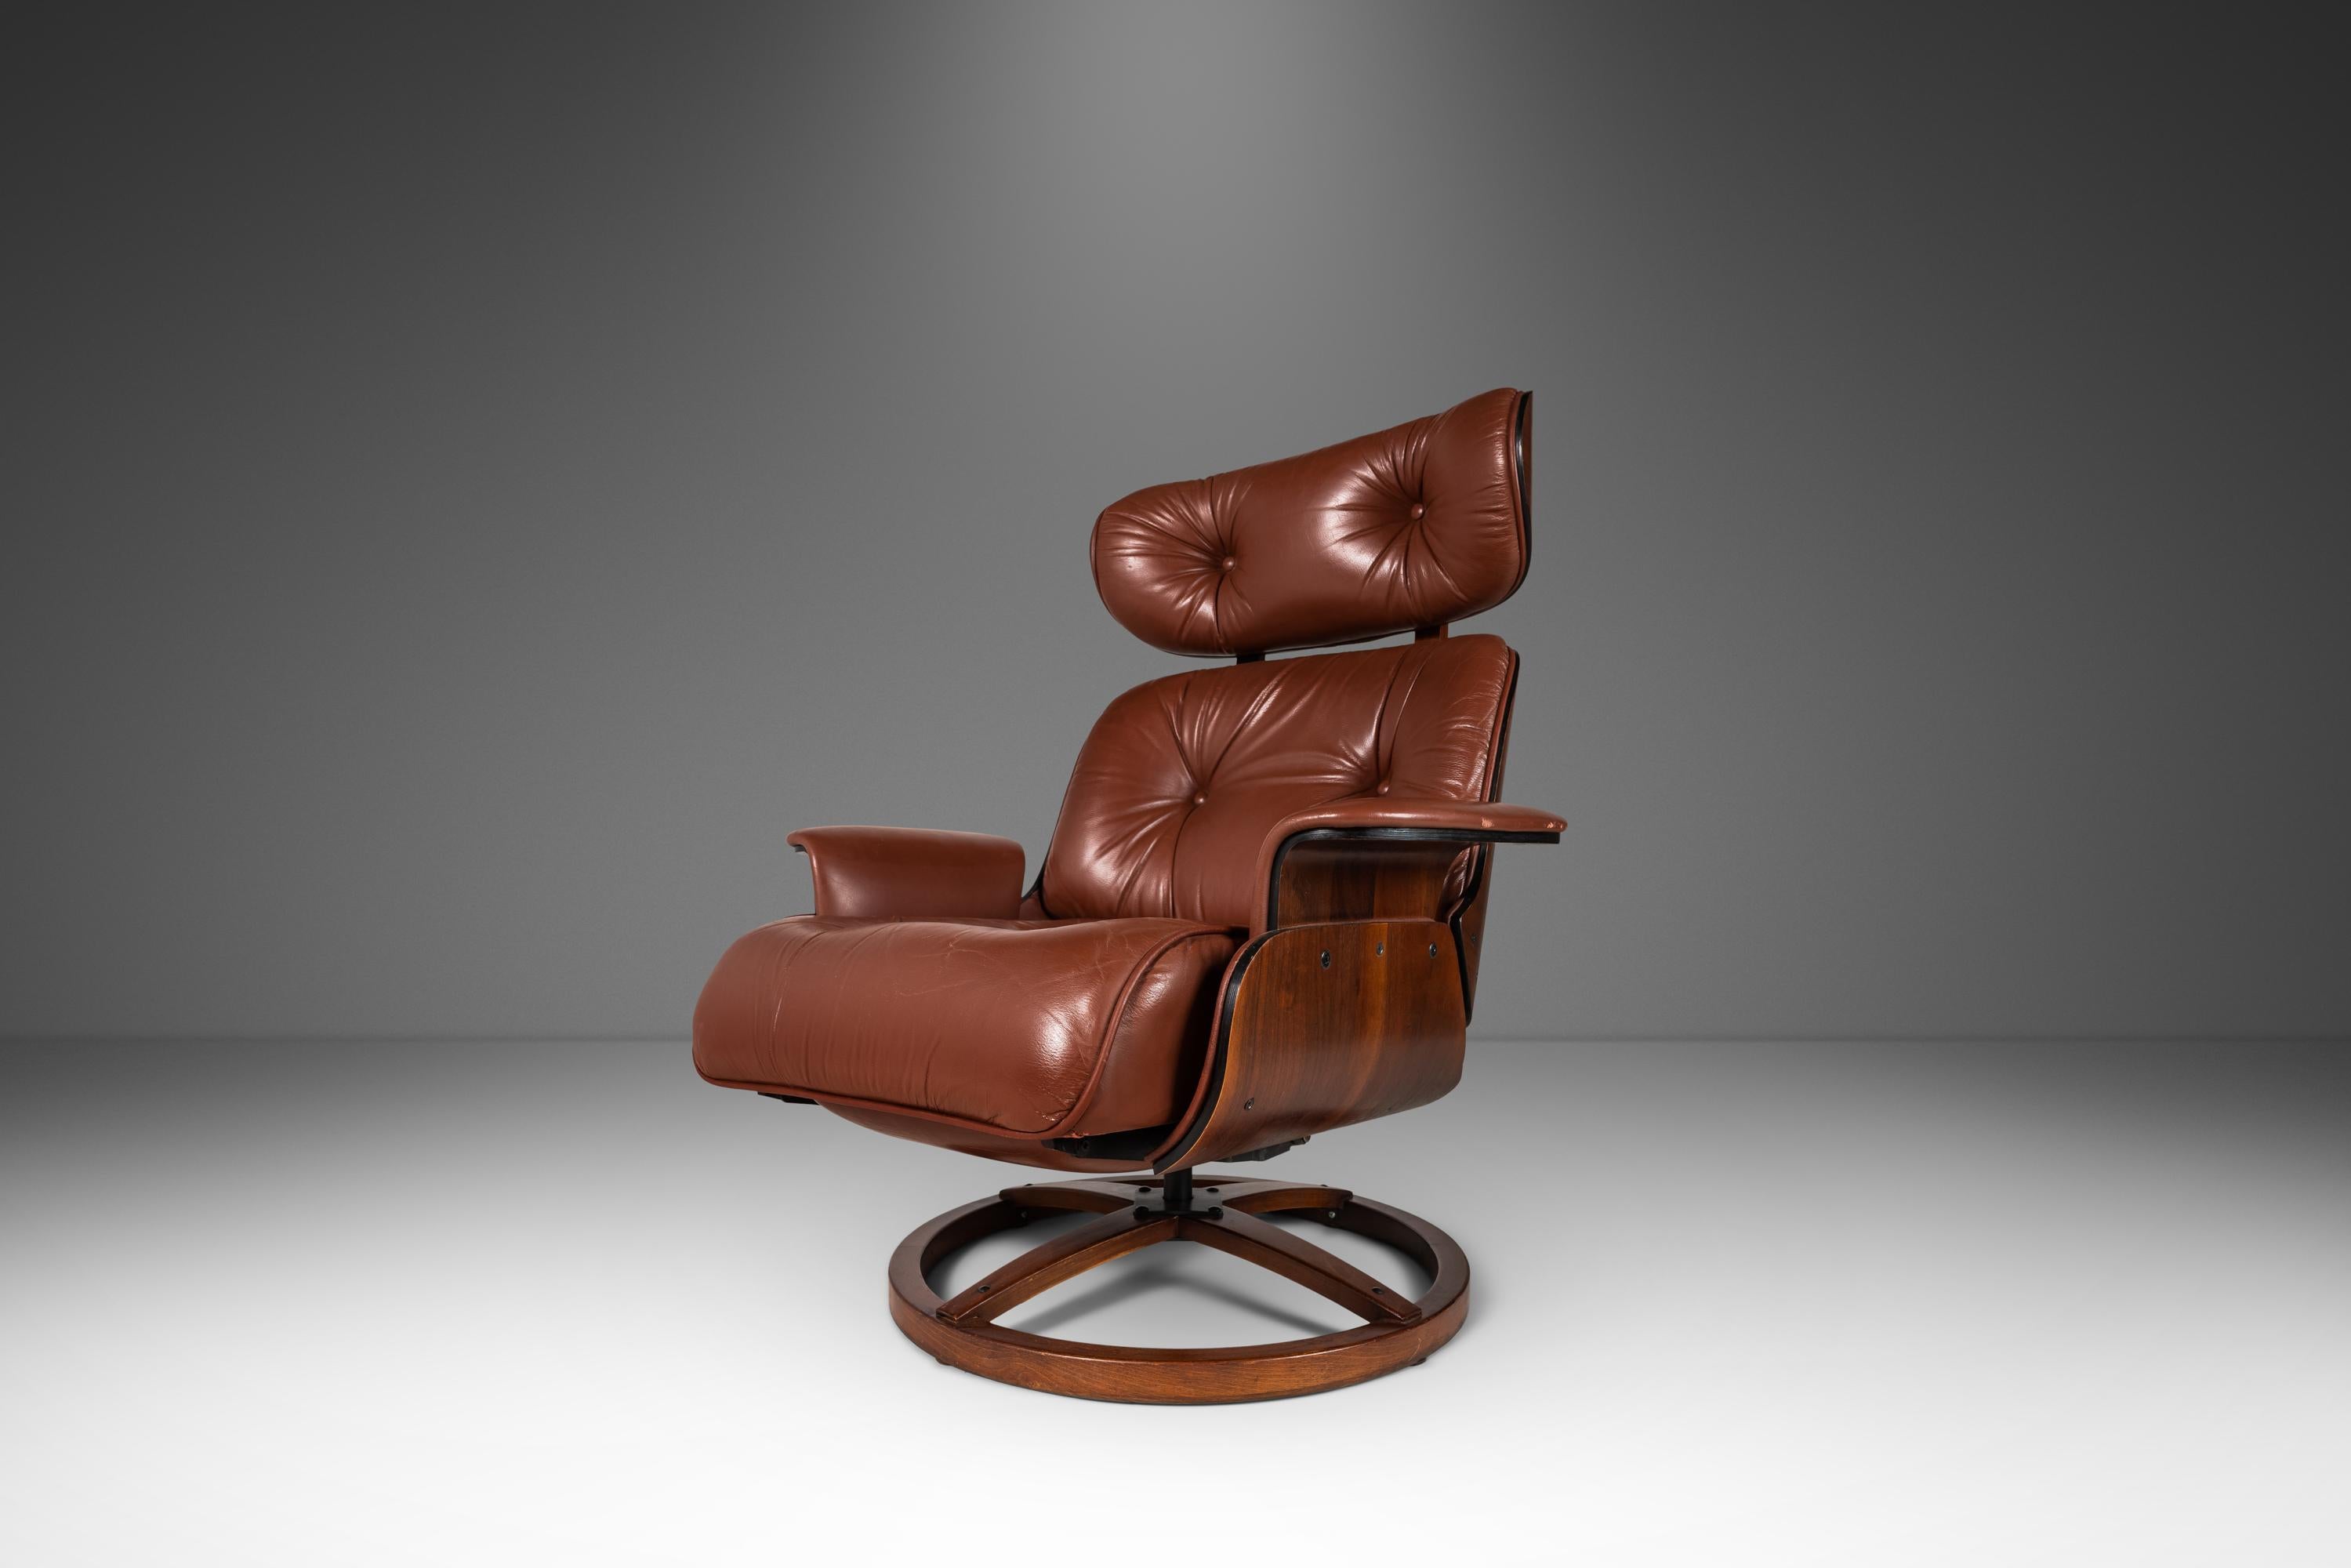 Steel Lounge Chair Recliner Attributed to George Mulhauser for Plycraft, USA, c. 1960s